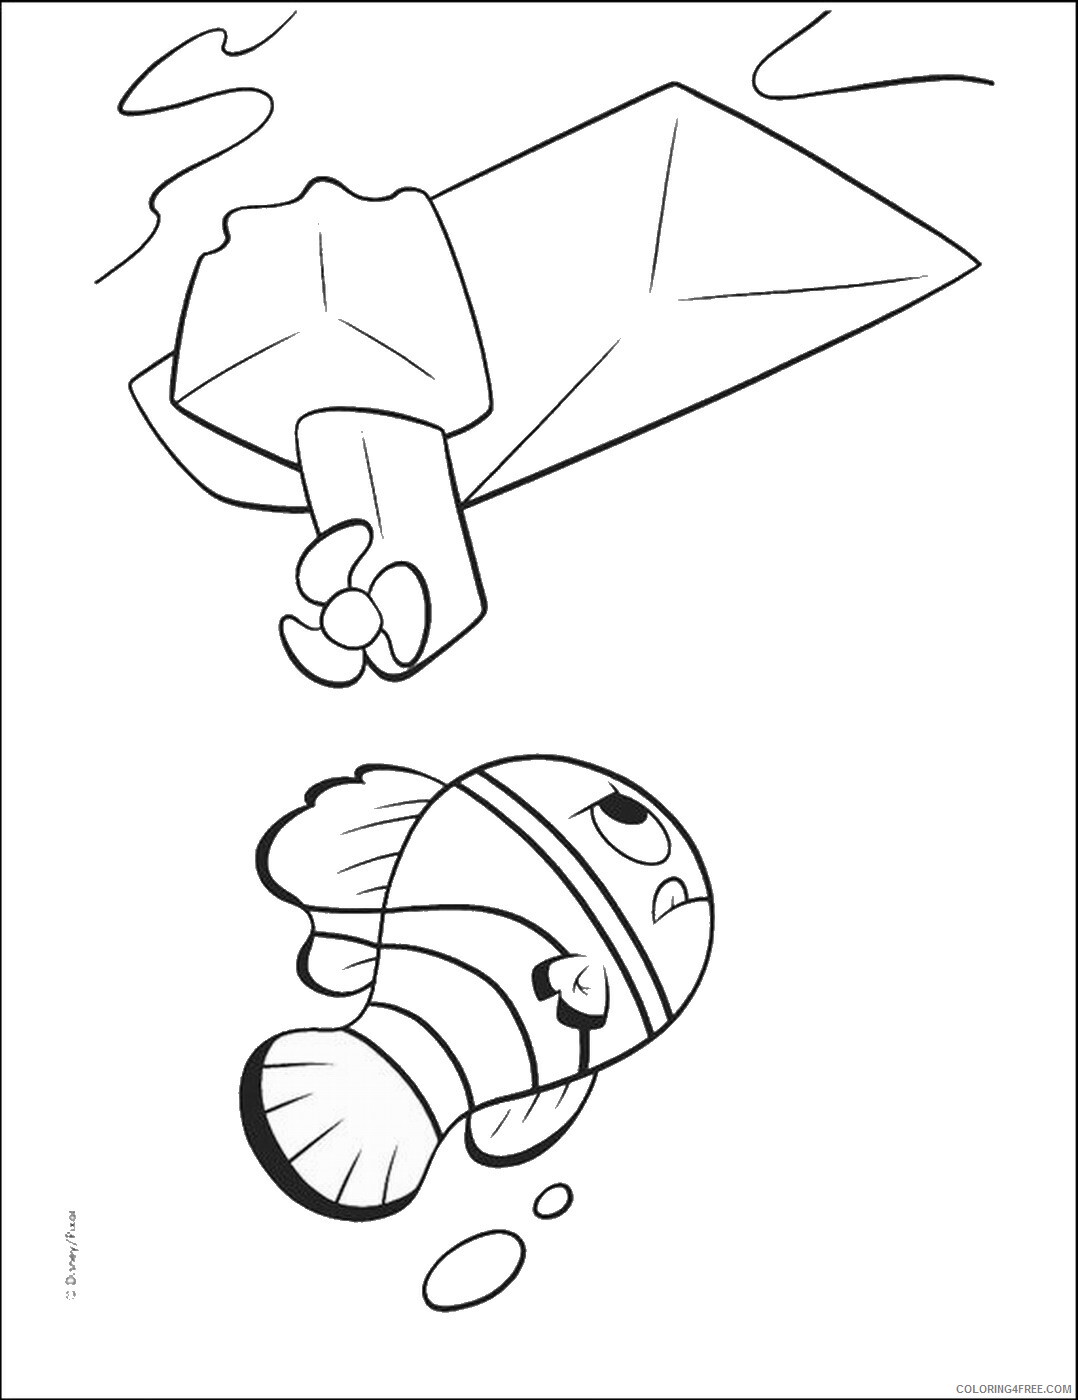 Finding Nemo Coloring Pages TV Film findingnemoc14 Printable 2020 02817 Coloring4free